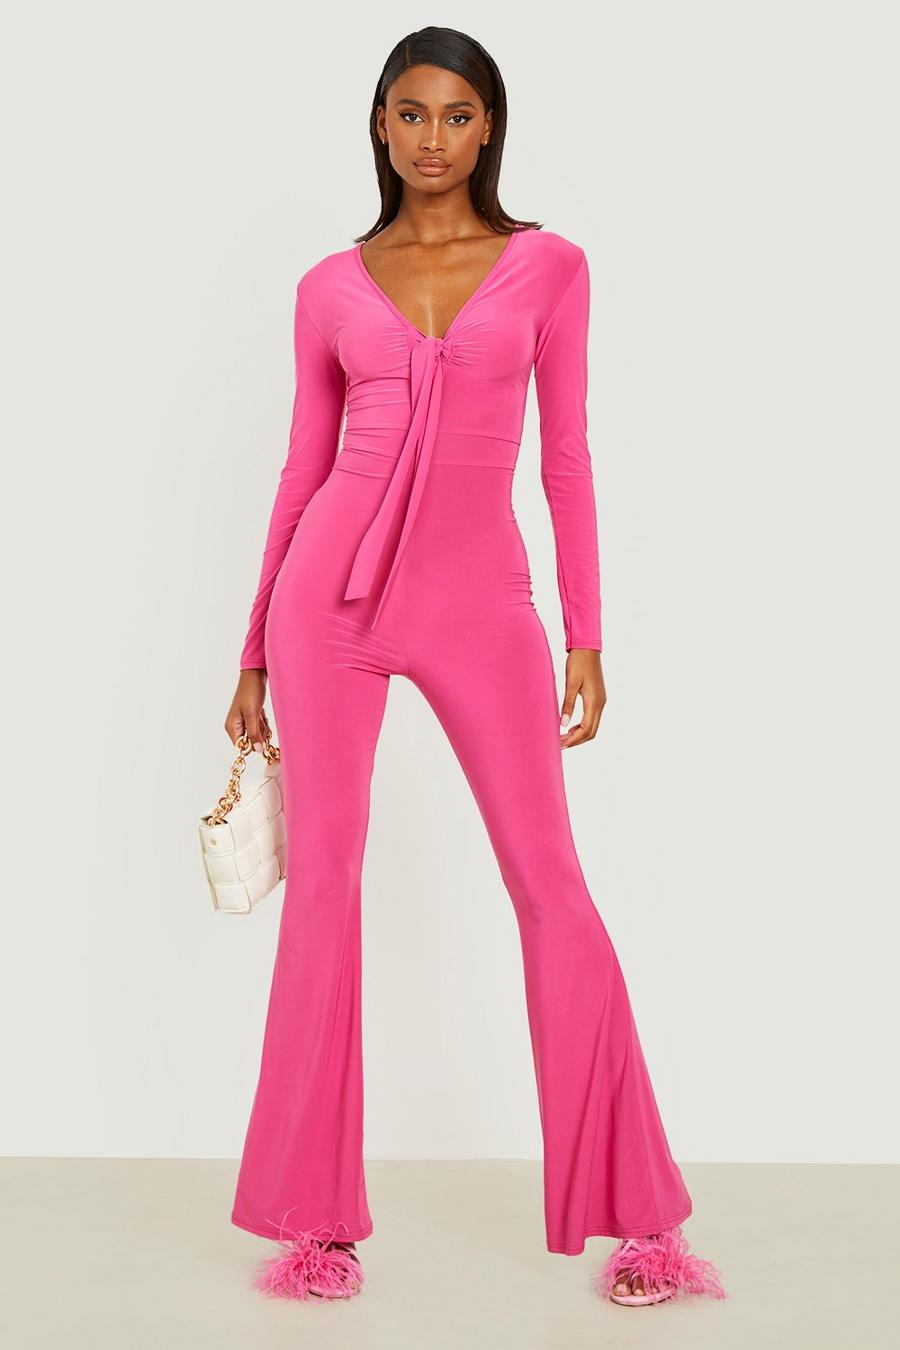 Hot pink Tie Front Flare Leg Slinky Jumpsuit